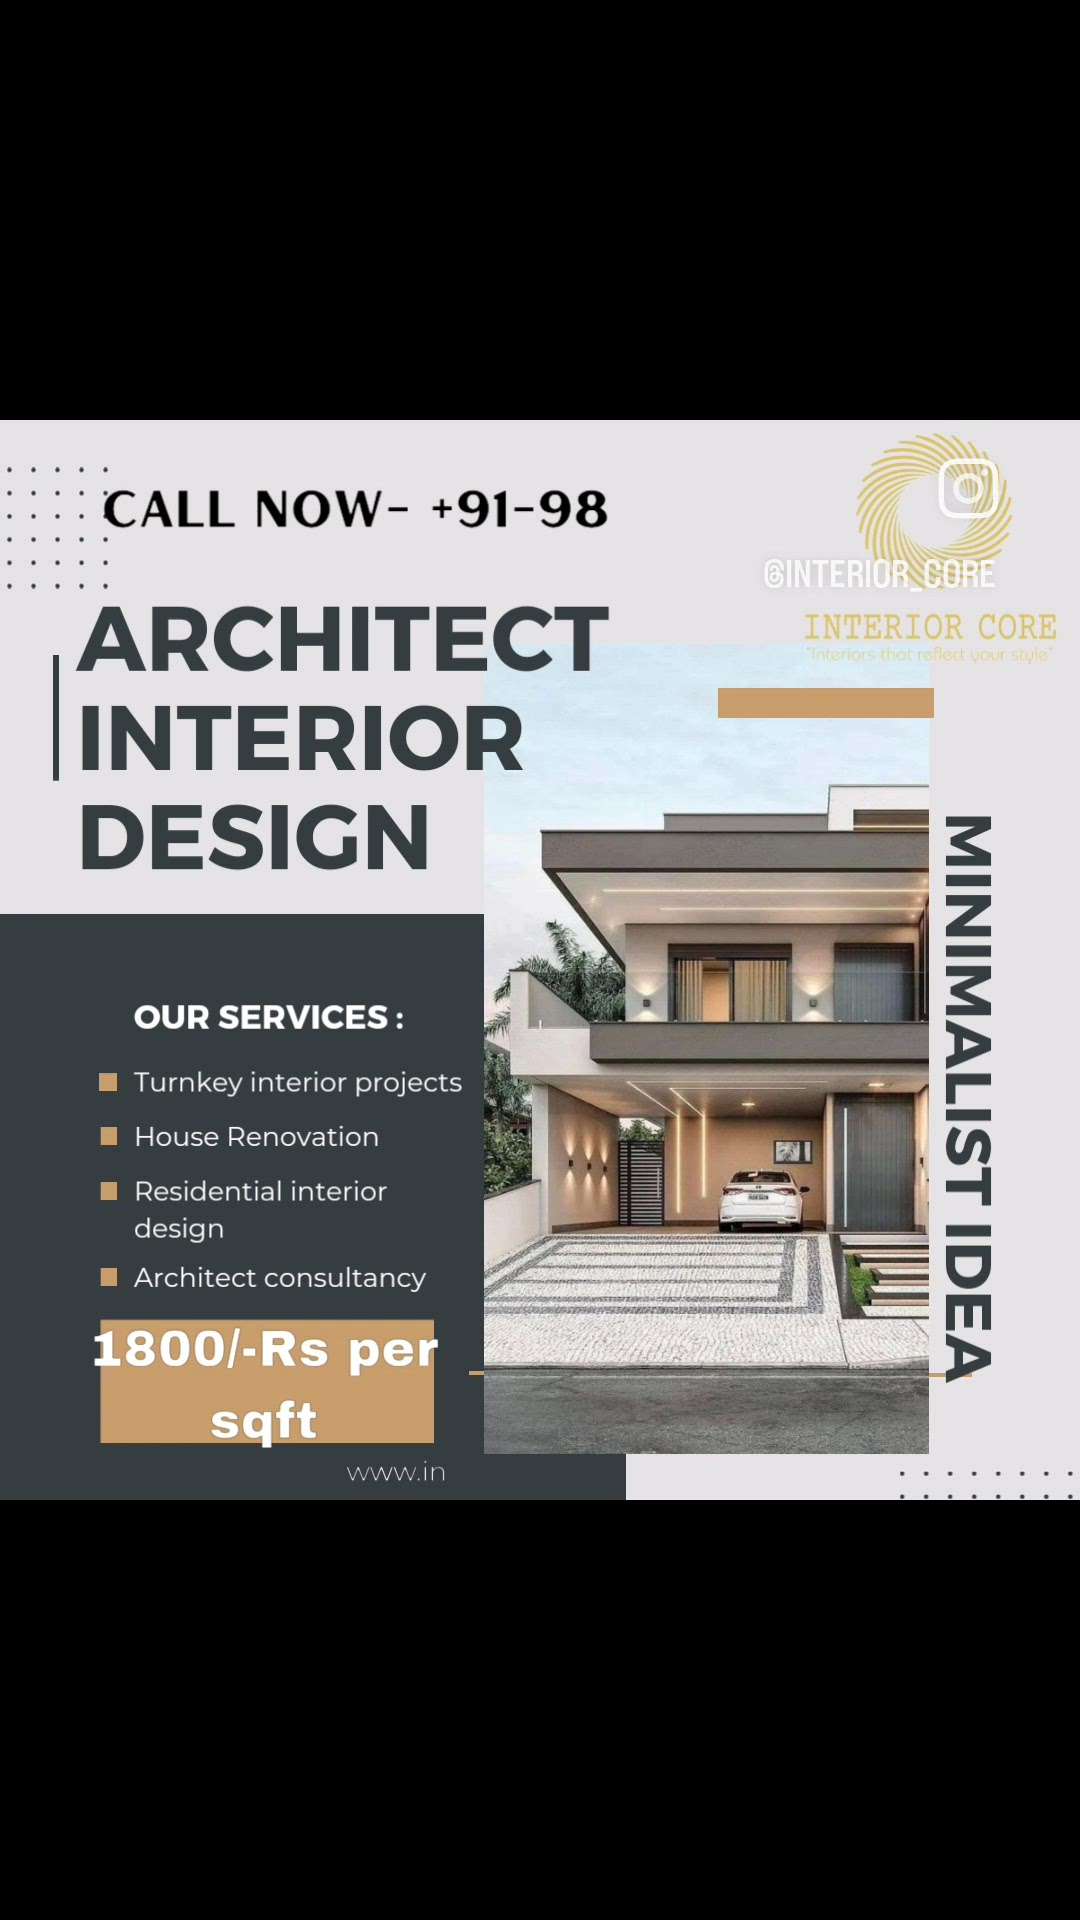 Dear Friends,

I feel pleasure to inform you that we have a strong team associated with us for *Interior Design, Renovation & Construction* of any type of building. The Project work is executed with all safety measures in place and during the progress of construction, the work is done under continuous supervision. 
 
Please feel free to contact the numbers below 👇🏻 for any type of *Construction & Interior*, be it Turnkey or petty projects all over Delhi NCR.

Regards,
🤙🏼 Sana Khan 
📱9891830873

#Turnkeyprojects # civilconstruction #homerenovation #realestate #luxsuryinterior #bespokefurniture #@nexthomes @interior_core @interior_core_studio #modularkitchen #interiordesign #architectinterior